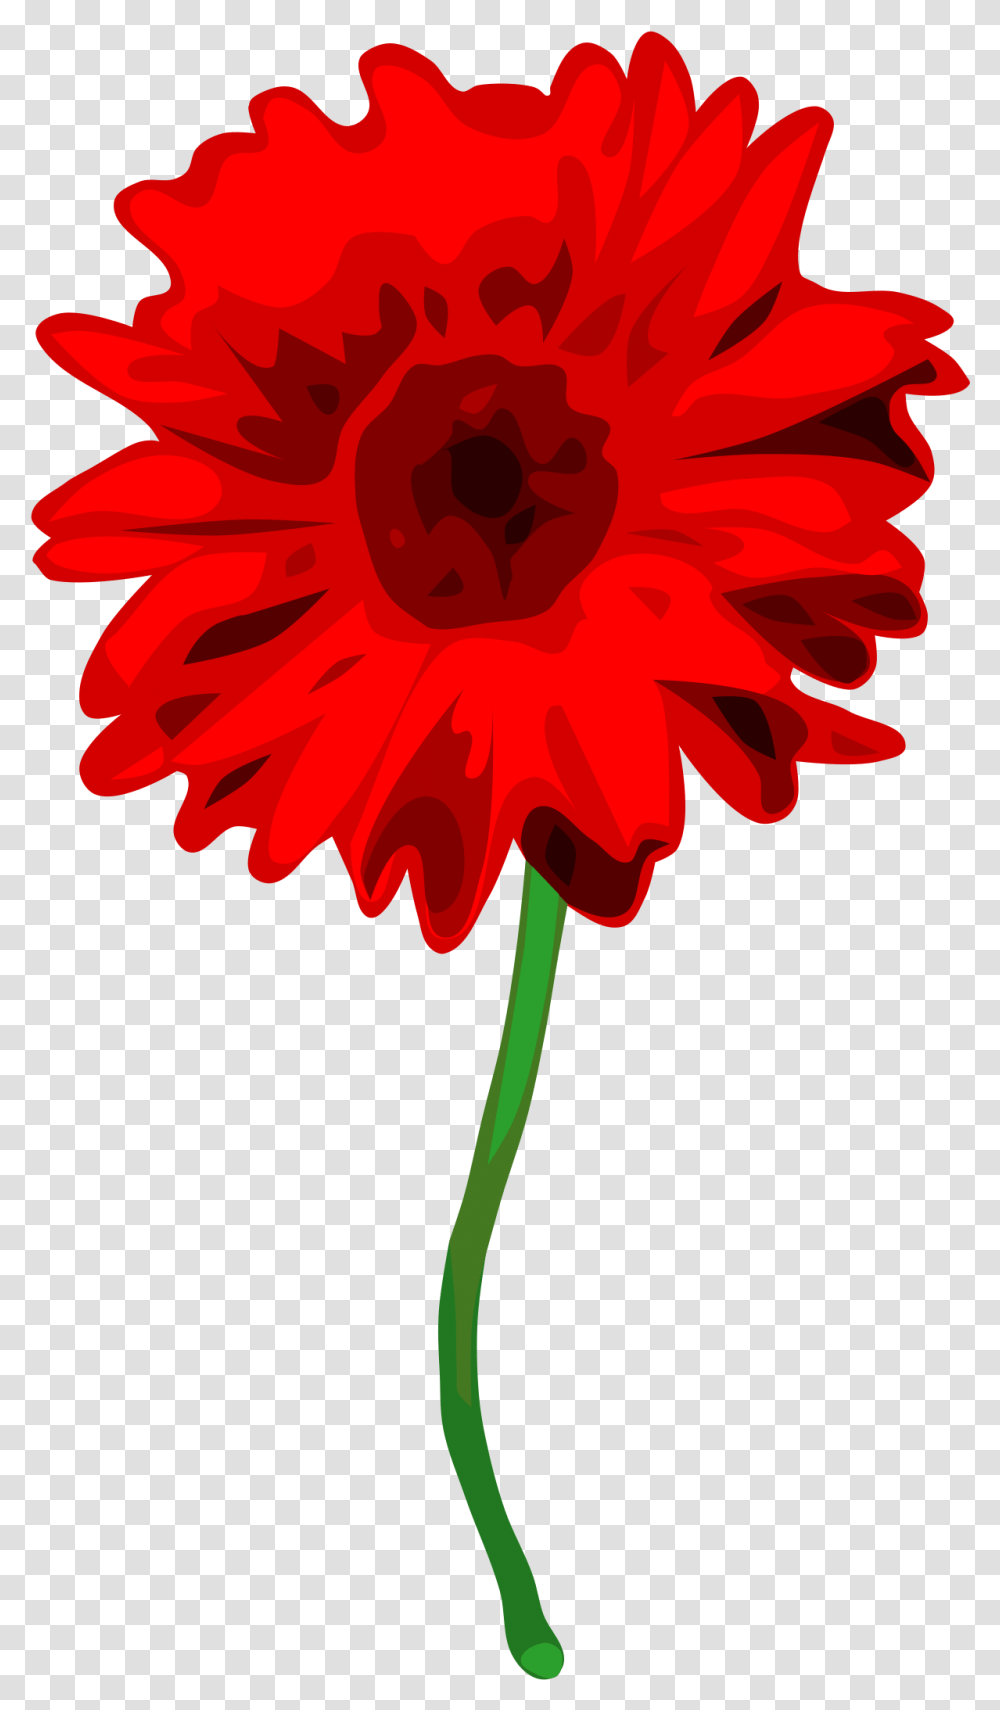 Gerbera Daisy File Images Small Flower Background, Plant, Blossom, Petal, Daisies Transparent Png